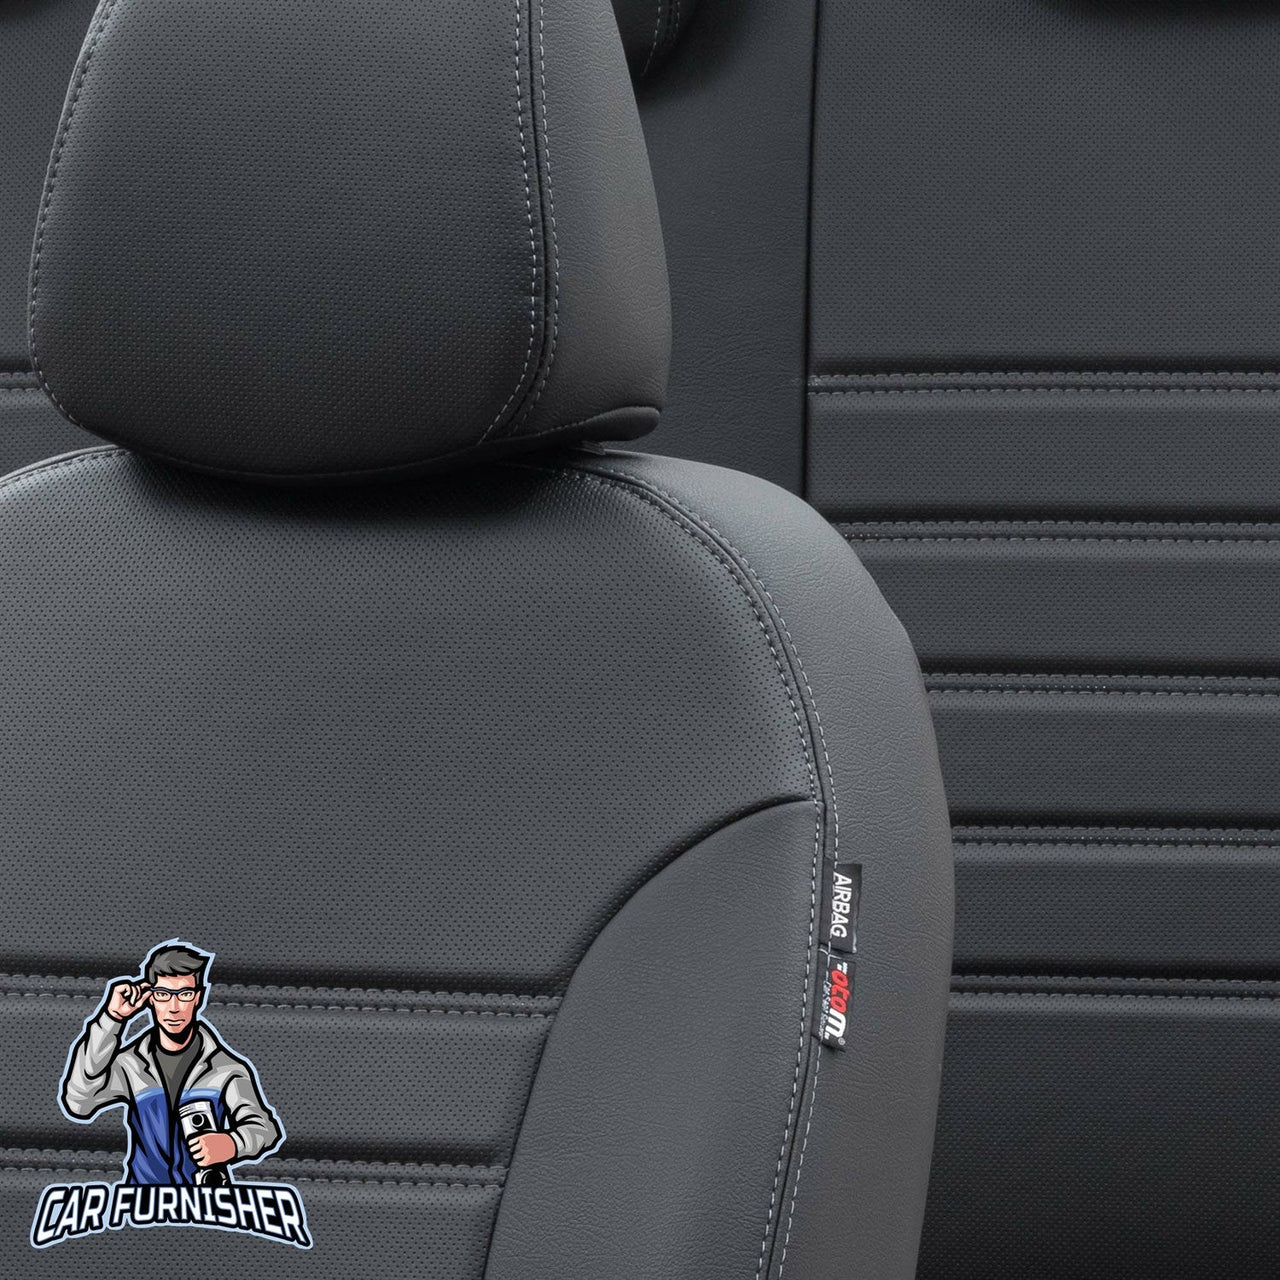 Mitsubishi Eclipse Cross Seat Covers Istanbul Leather Design Black Leather